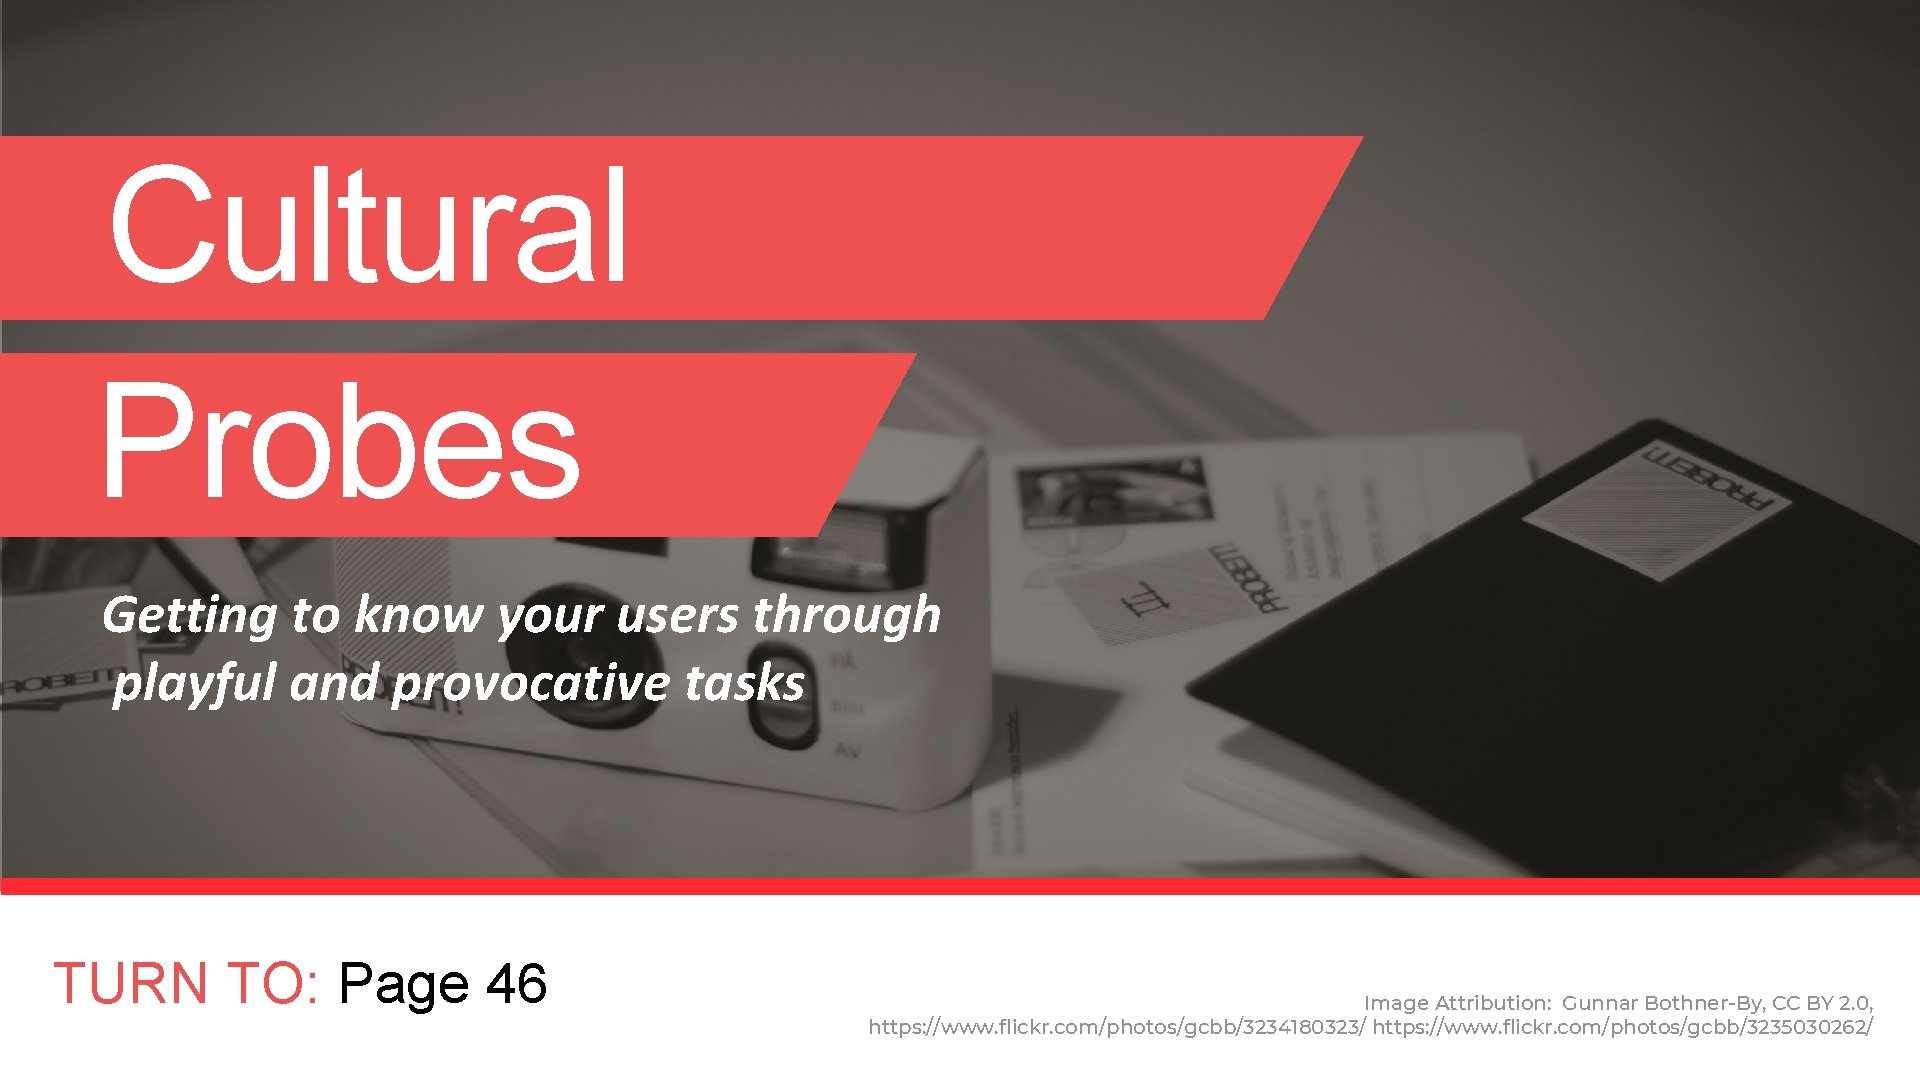 Cultural Probes Getting to know your users through playful and provocative tasks TURN TO: